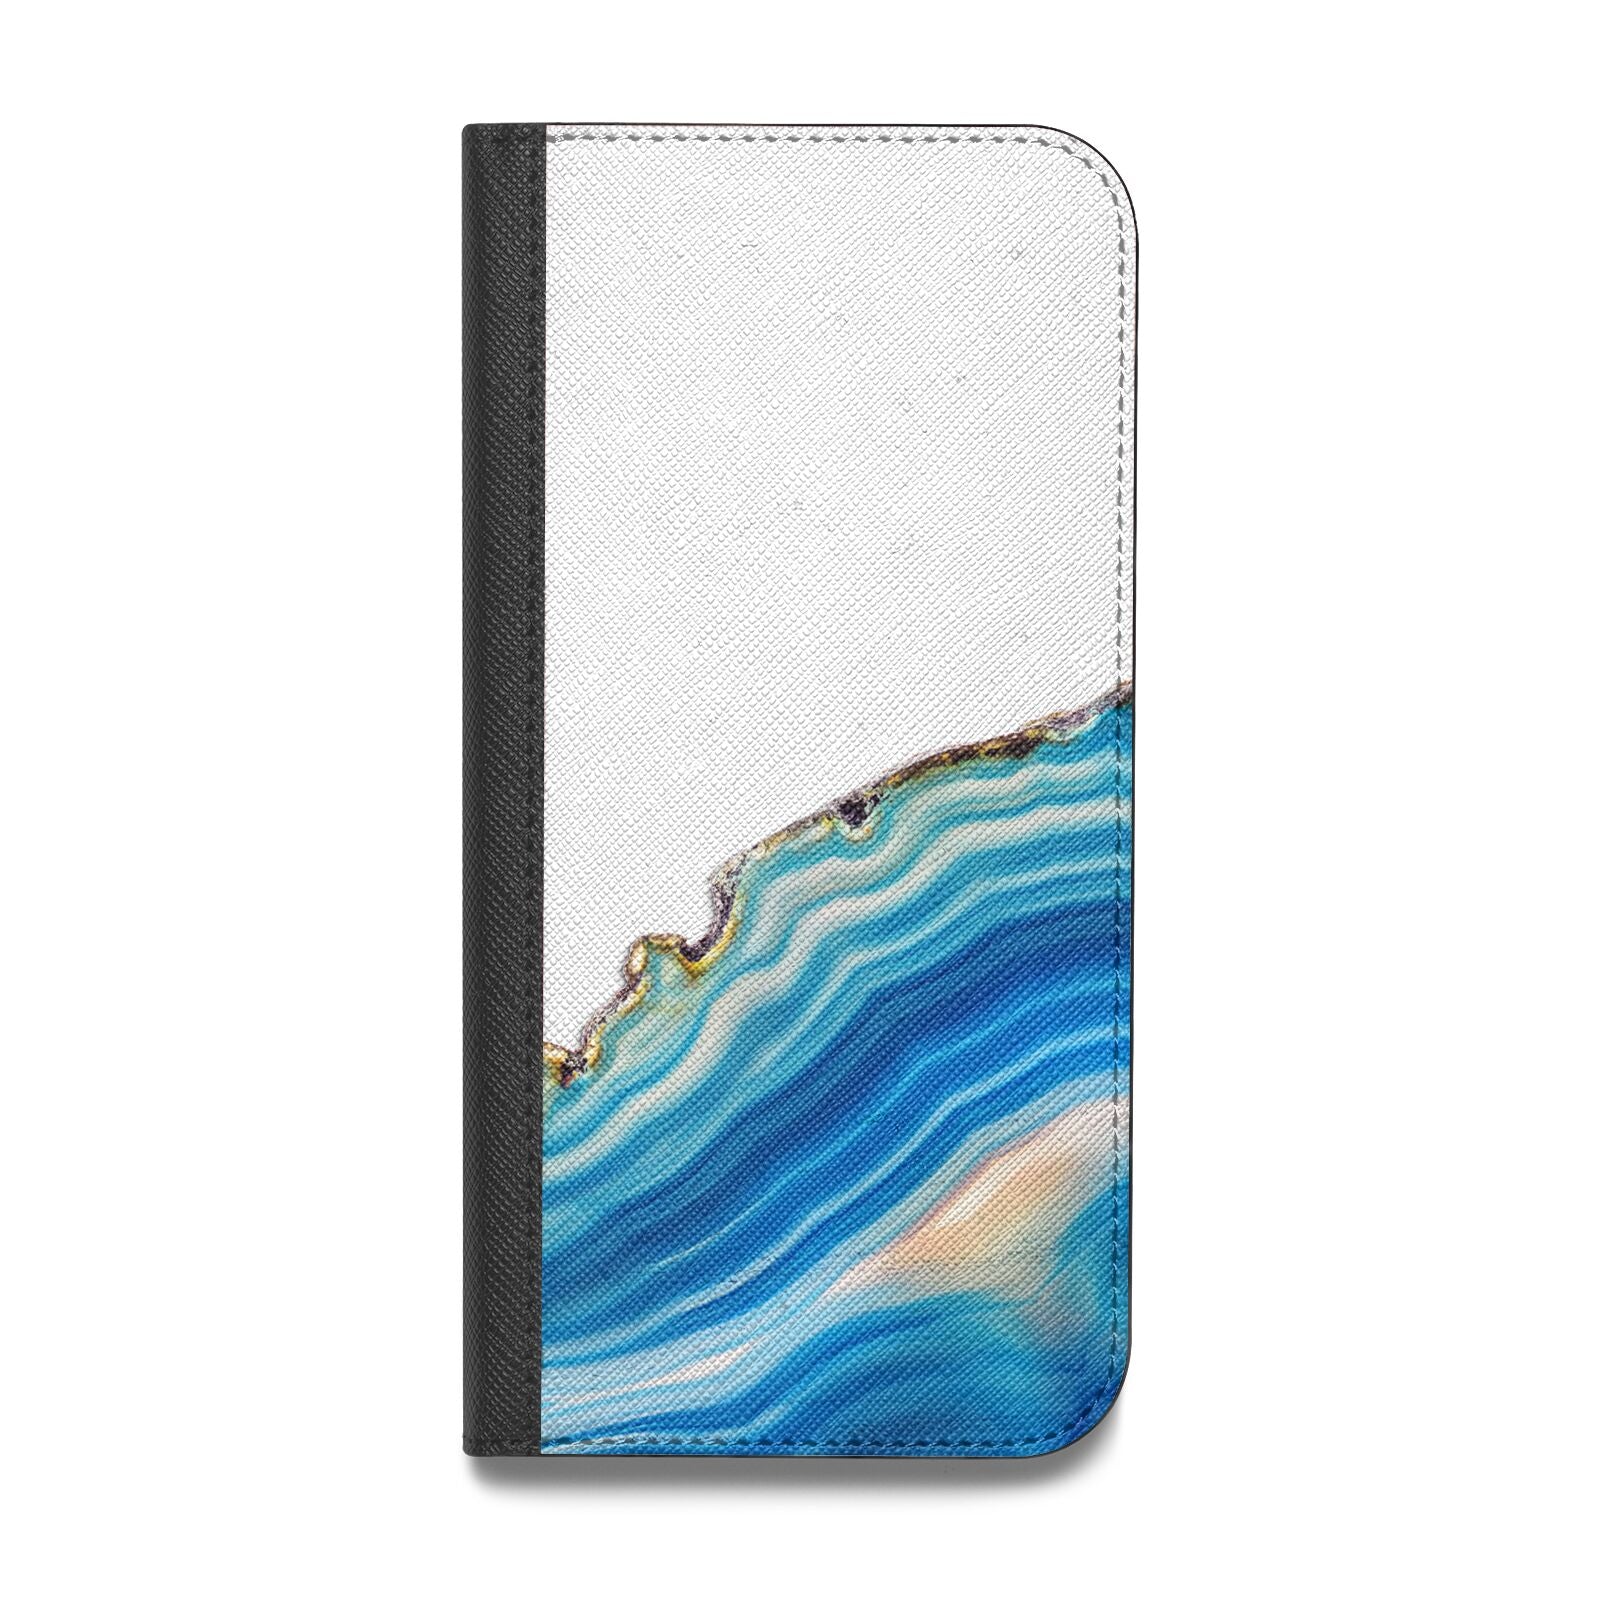 Agate Pale Blue and Bright Blue Vegan Leather Flip iPhone Case